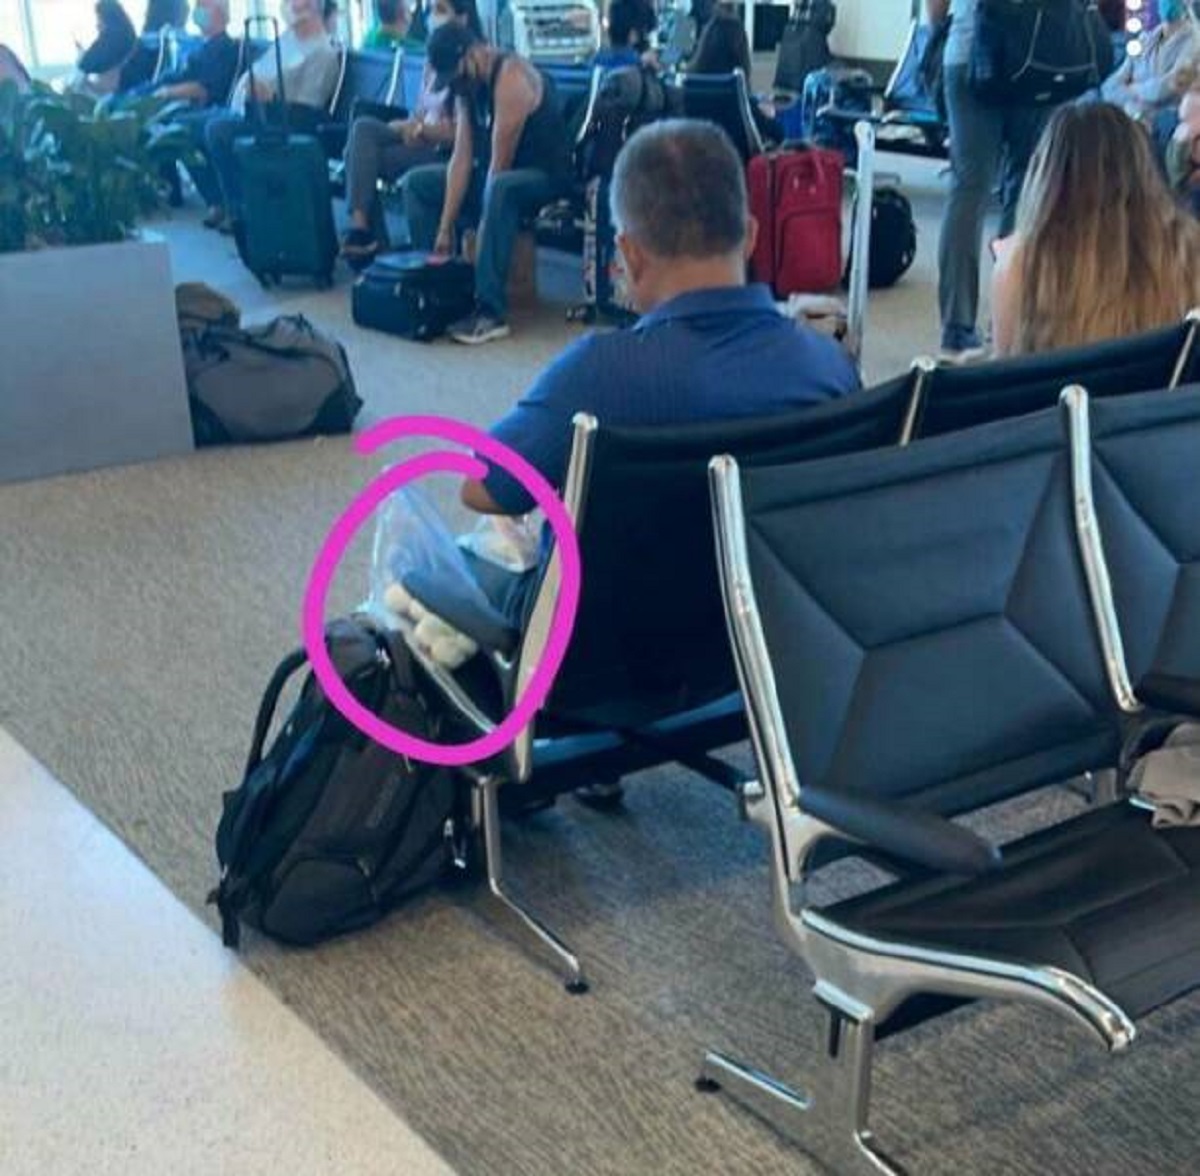 "Man Snacking On A Bag Of Smelly Hard-Boiled Eggs While I Was Waiting For My Flight"